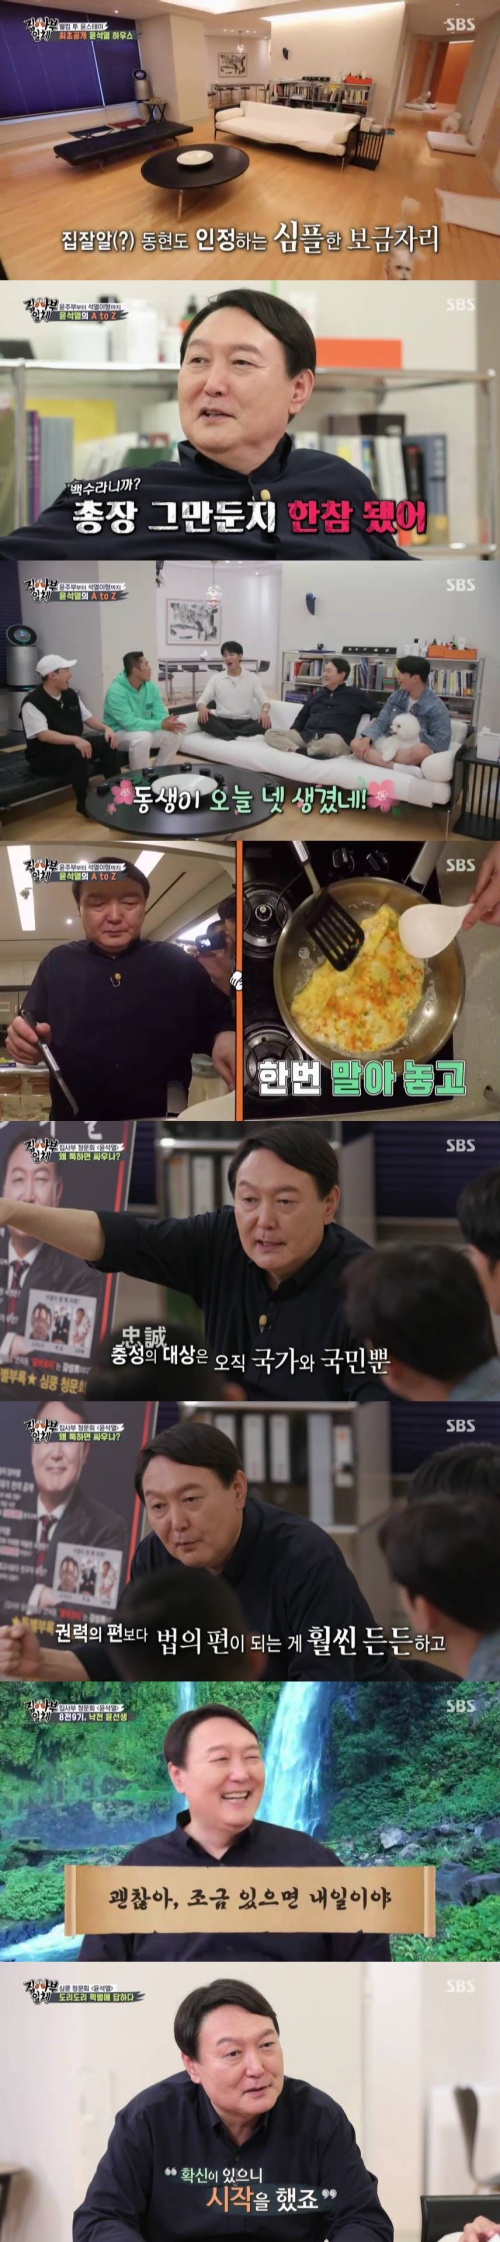 SBS All The Butlers, which is featured in the presidential election, has surpassed the double-digit highest audience rating per minute.According to Nielsen Korea, a ratings agency, the audience rating of SBS All The Butlers, which was broadcast on the 19th, was 7.8 percent, up 3.9 percentage points from last week, proving the interest of viewers.The target audience rating of 2049, which is a topic and competitiveness indicator, was 2.2%, and the highest audience rating per minute soared to 12.1%.The broadcast was featured in the presidential election.The news that three of the most supportive presidential candidates who declared their candidacy for the 20th presidential election was known to appear, and the first runner on the day, former prosecutor general Yoon Seok-ryul appeared.On this day, Yoon Seok-ryul welcomed the members with comfortable clothes at his house, and his house was revealed for the first time.Yoon Seok-ryul said, I asked you to come to do something delicious. He said, I treat kimchi stew, bulgogi, egg rolls, etc. with skill, and the members who are hard to call.I am a white man now.It has been a long time since I quit Prosector General of South Korea. Or Actor Ju Hyuns vocalization was also friendly and friendly.When asked about the resignation of Prosector General of South Korea and the presidential candidacy, Yoon Seok-ryul said, It is difficult to decide to run.Its not normal, he said, adding that he decided to run for president after a long period of troubles after his retirement.Our generation could have acquired Apartment for about 10 years, but it was too difficult to get a house for the present, said Yoon Seok-ryul. If a young person does not have hope, the society is dead.Im a little afraid when I do something new, he said. Im a little scared when Im doing something new.I am confident that I can push it in the direction I think without giving up, although there are many things that I do not have enough. The All The Butlers hearing was held to intensively explore Master Yoon Seok-ryul.First, Yoon Seok-ryul talked about his representative quote, Im not loyal to people. He told his juniors, The prosecutor should not be loyal to people.I am saying that people are personnel rights, and that the object of loyalty is only the nation and the people, and even if you can like people, you are not loyal.Yoon Seok-ryul said, The chicken is important, but it is with the president. The members said, We handled the case that we took over according to the law.There is no reason to challenge the president, he said. It is much more secure to be on the side of the law than to the side of power.If the law of the powerful is not properly handled, the people can not be told to keep the law, and society is in turmoil. It is important how much the investigation into the powerful is based on principle.It should be based on the principle unconditionally. In addition, the hearing focused attention on keywords related to them such as Left, 9th in 8, and Doridori.When asked if there was anything he wanted to take away from Lee Jae-myung and Lee Nak-yeon, who foreshadowed the presidential feature, Yoon Seok-ryul said, I want to be meticulous to Lee Nak-yeon and I want to resemble Lee Jae-myung.Yoon Seok-ryul replied, Yes, to the question I am the 20th president of the Republic of Korea.I have to show you more, but I have seen you doing well so far, so you will have the belief that you will do well. Finally, Yoon Seok-ryul asked, If I become president, I will not do this. Sharing rice together is the basis of communication.I will always communicate with many people, including opposition parties, journalists, and people who need encouragement. He said, I will not eat and communicate with people. I will not hide in front of the people, whether I did well or wrong.Meanwhile, the special feature of All The Butlers presidential candidate will be former prosecutor general Yoon Seok-ryul, Gyeonggi Governor Lee Jae-myung on the 26th, and Lee Nak-yeon, former Democratic Party leader on October 3.SBS